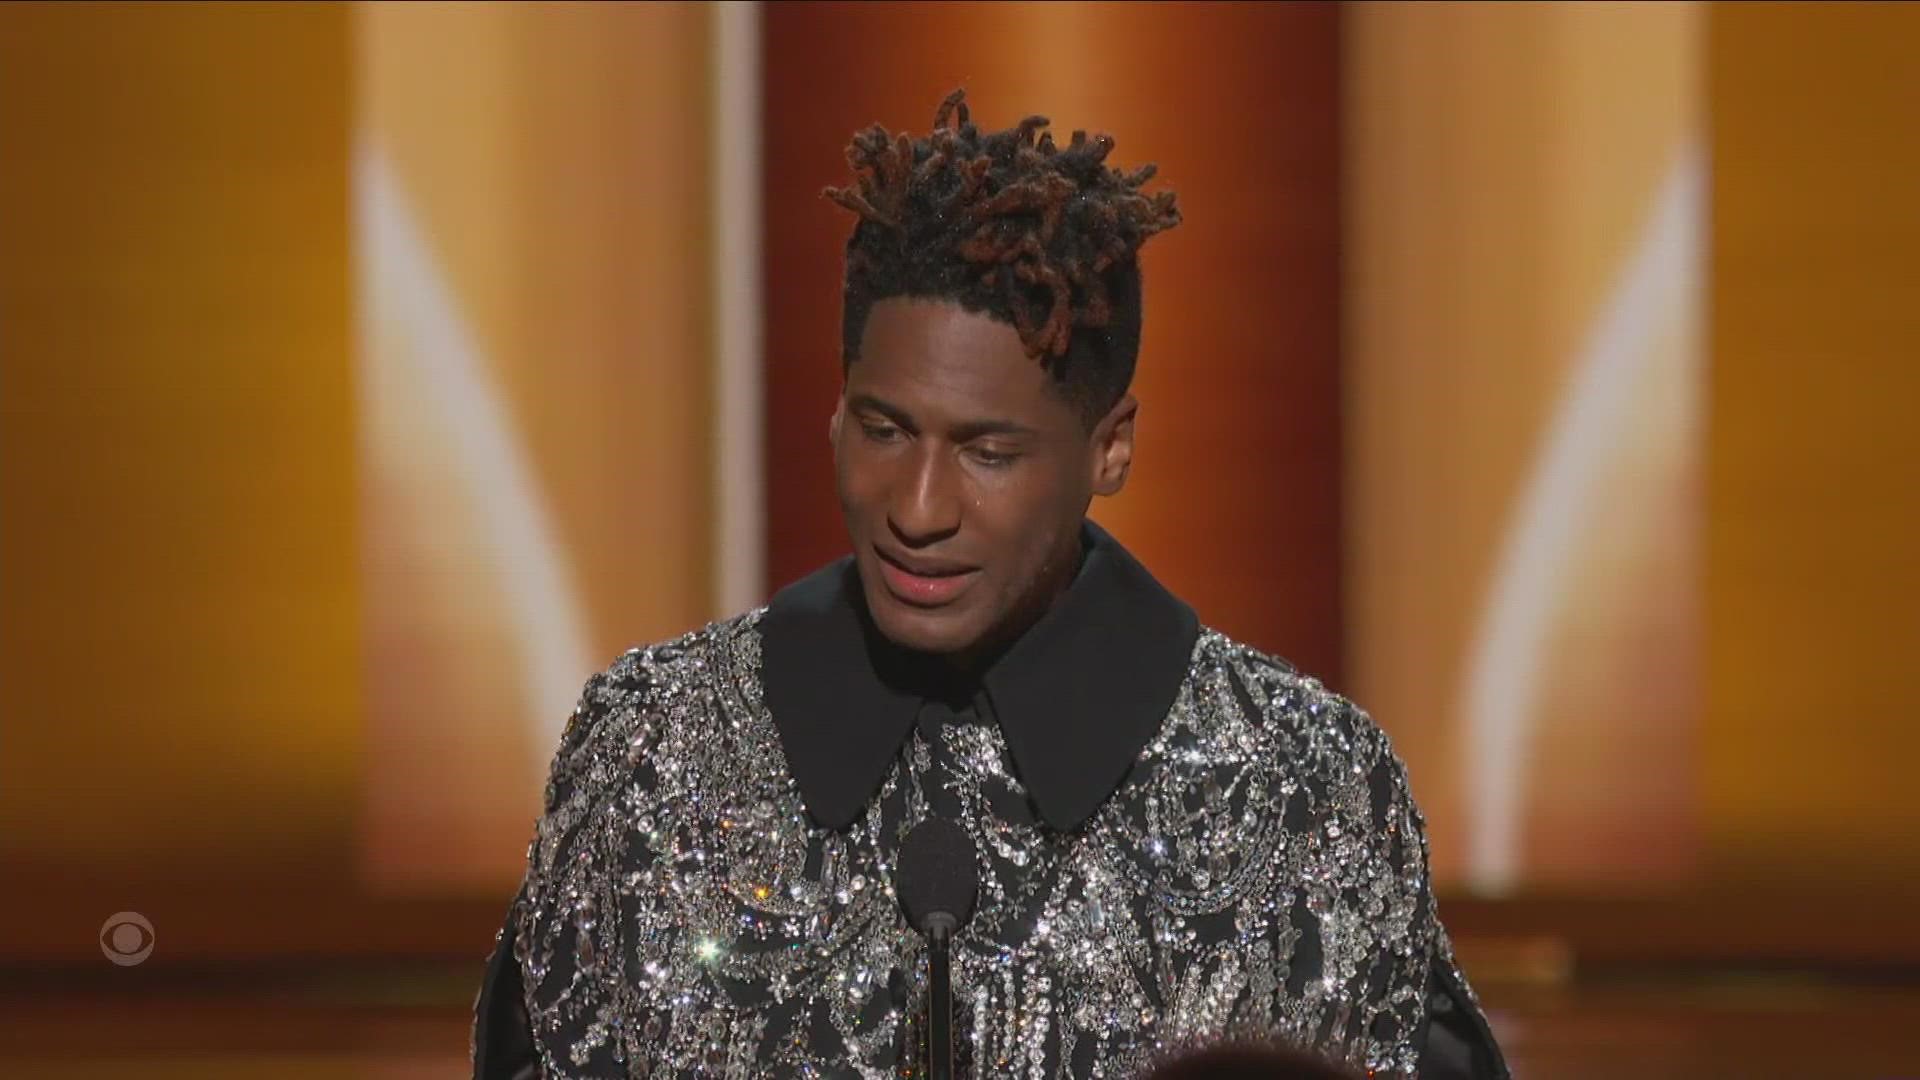 Jon Batiste won album of the year honors for “We Are” at the Grammy Awards on Sunday, giving him five trophies on the night.